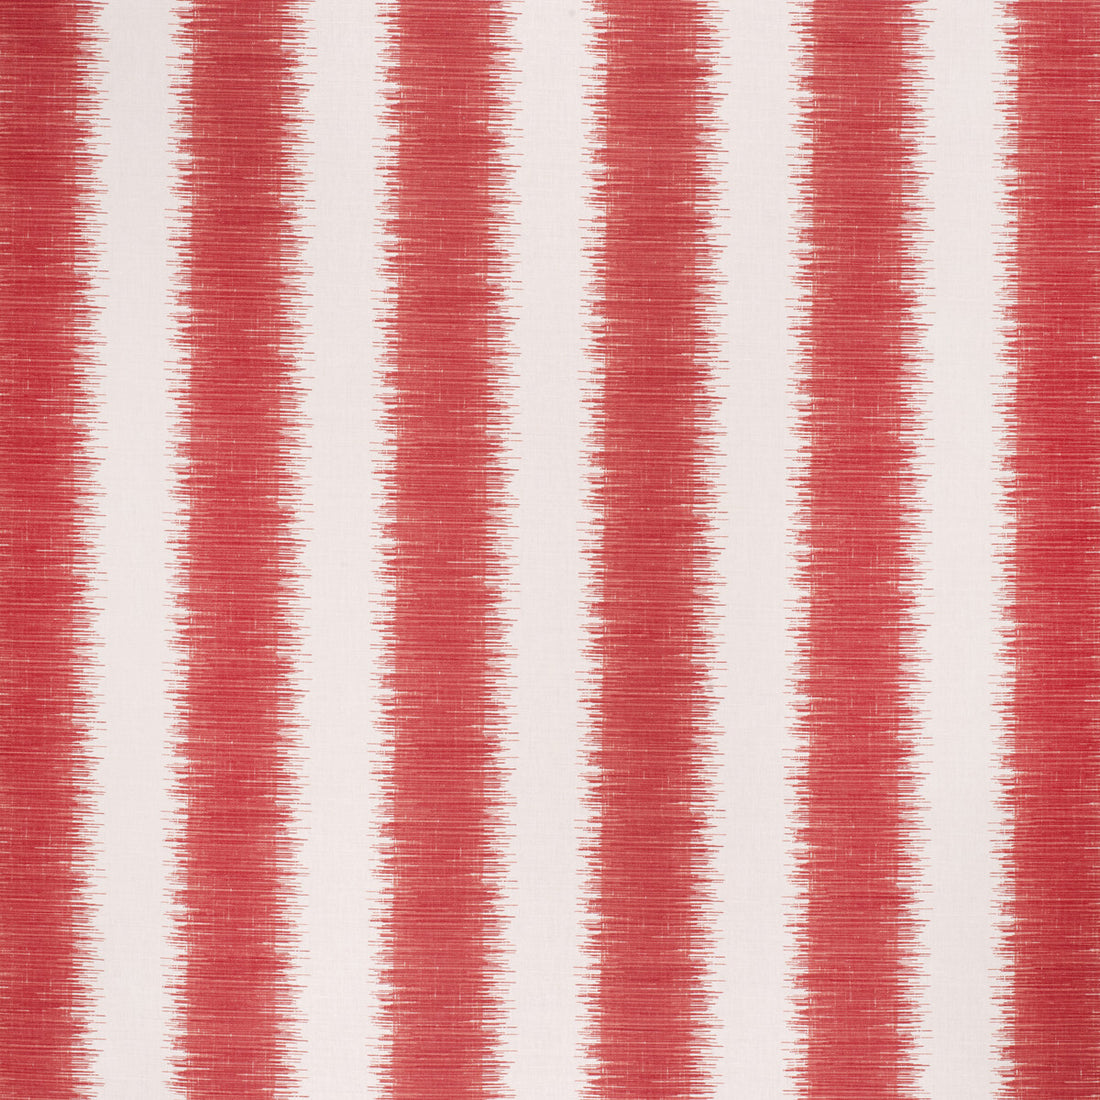 Hampton Stripe fabric in red/ecru color - pattern 2020135.19.0 - by Lee Jofa in the Paolo Moschino Fabrics collection